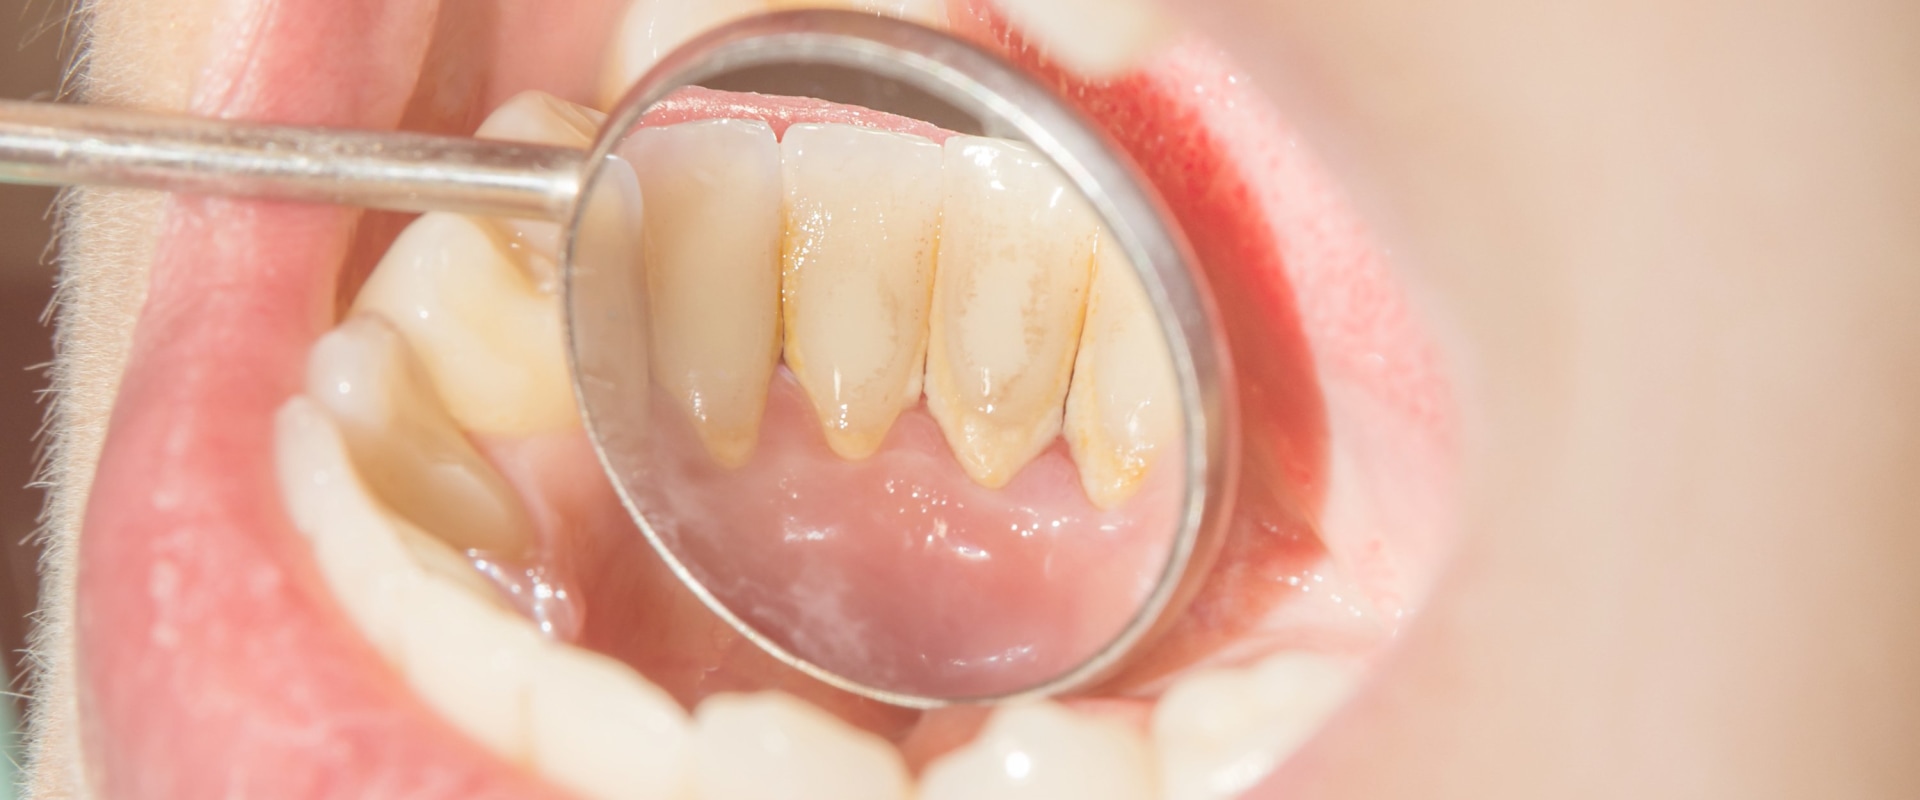 Can the dentist completely remove tartar?